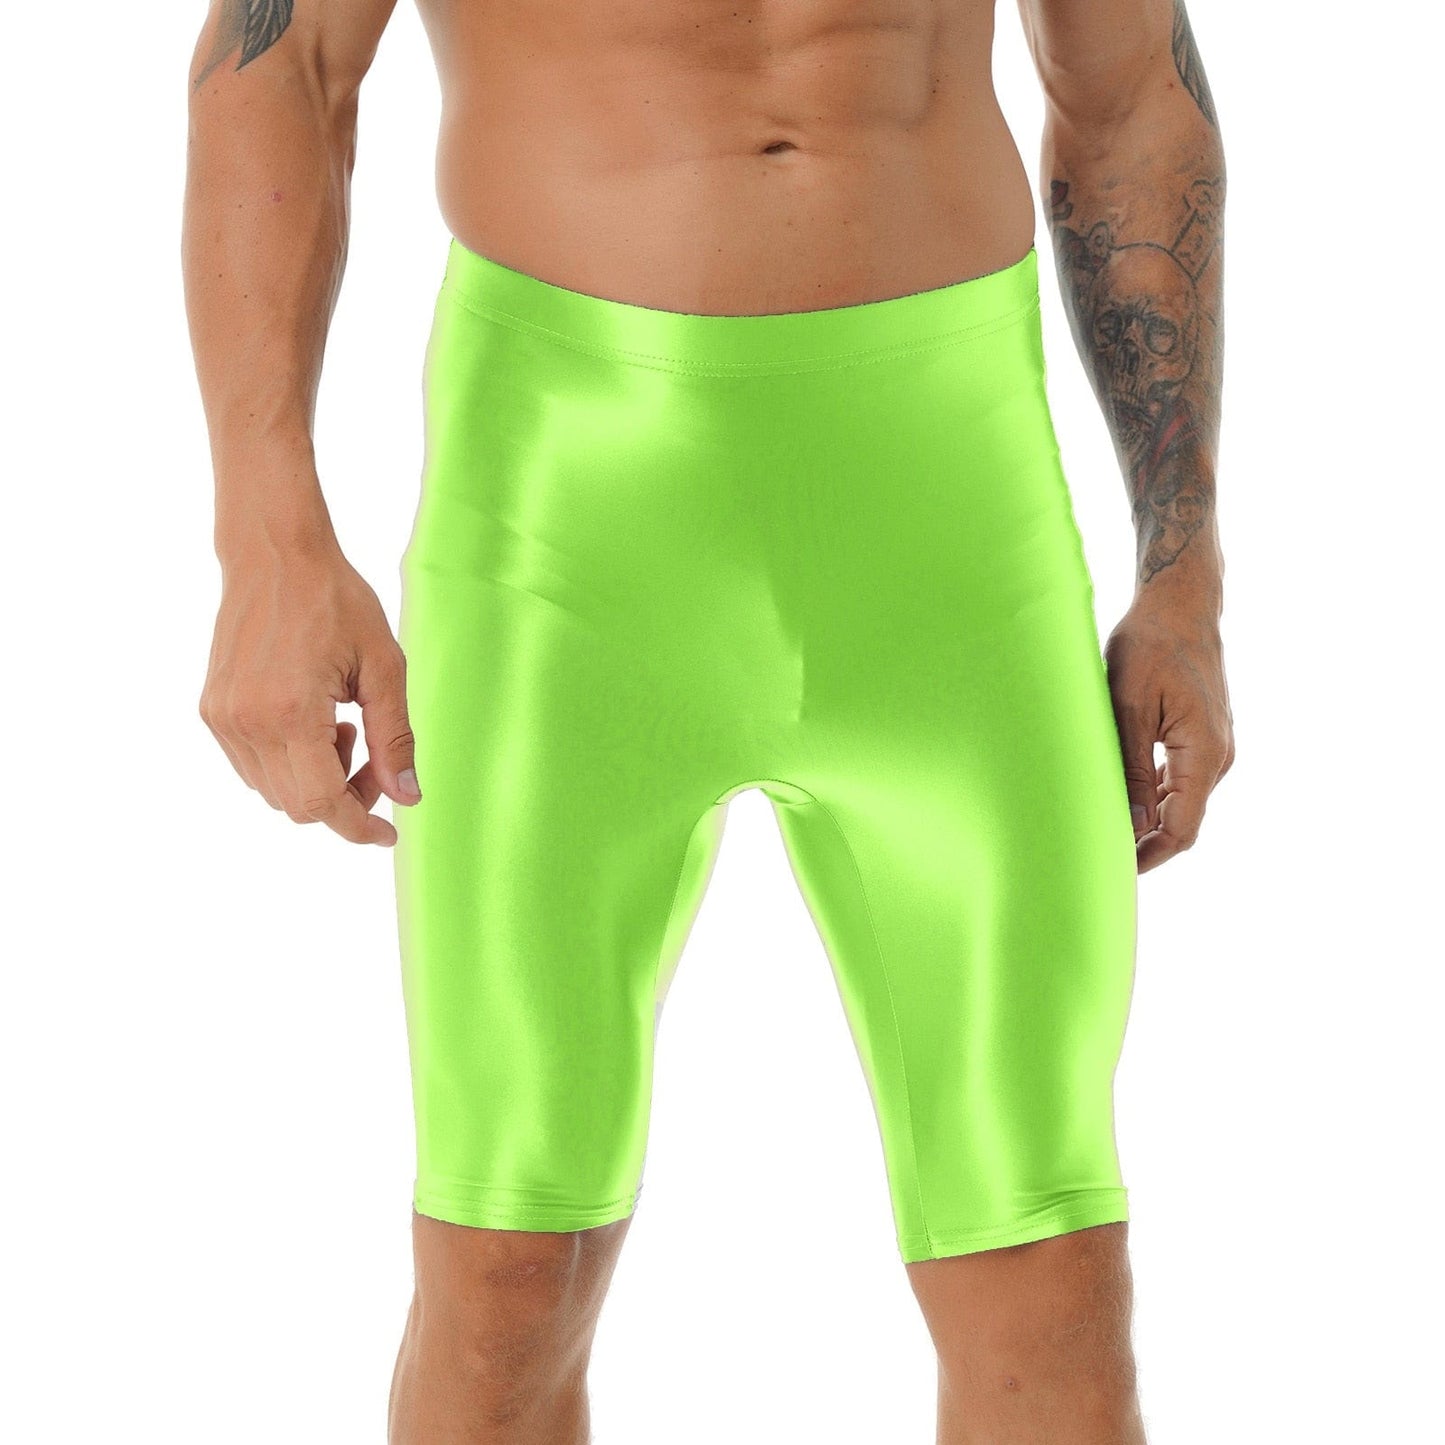 Kinky Cloth Fluorescent Green / M / 1pc Mens Glossy Swimsuit Shorts